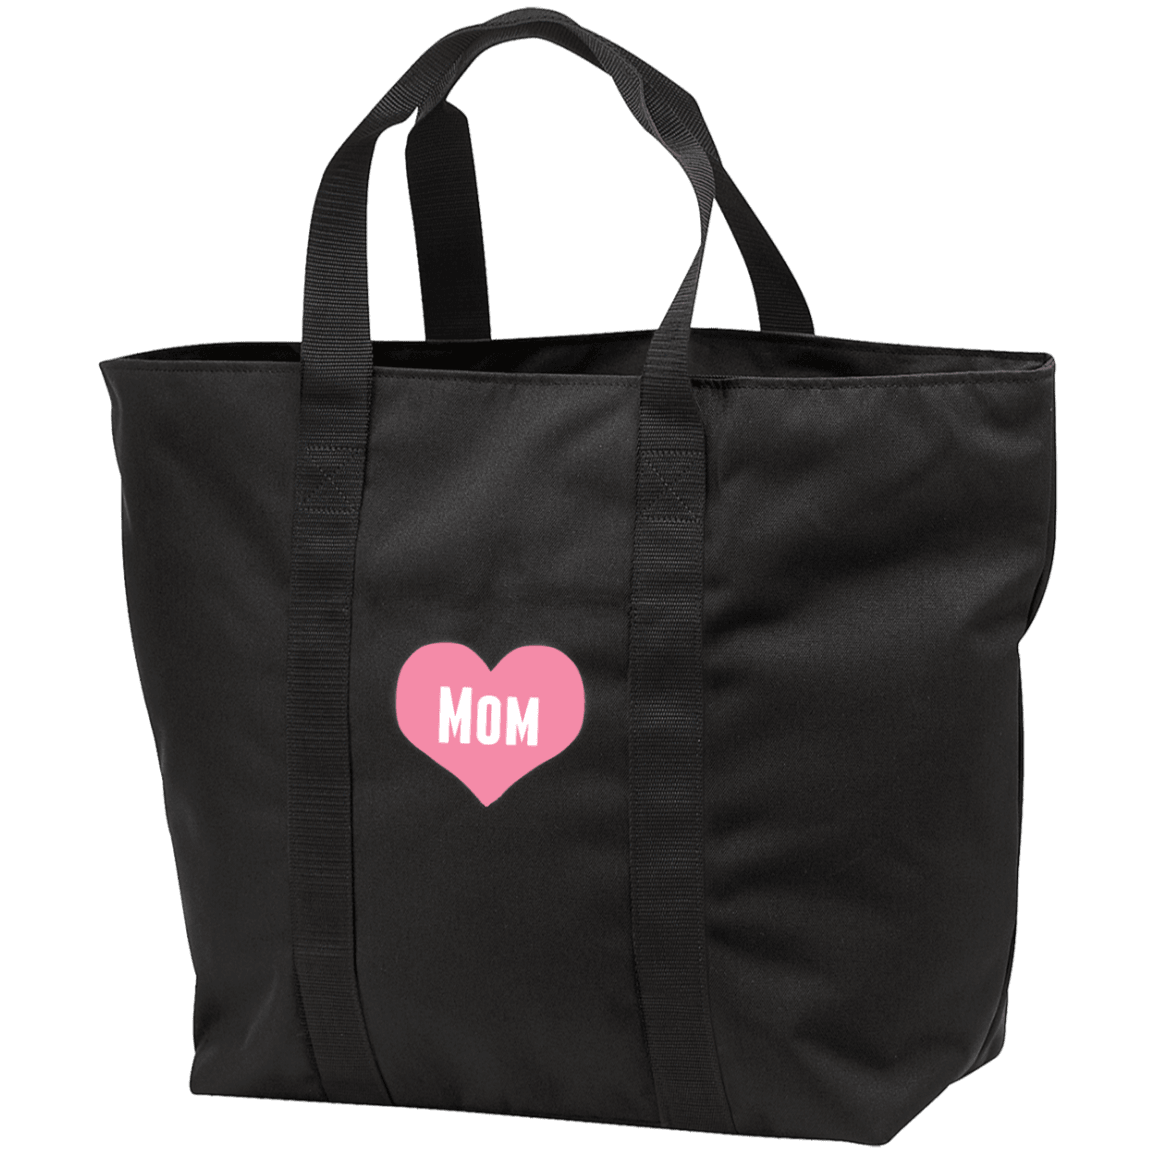 Designs by MyUtopia Shout Out:Mom Heart Pink Embroidered All Purpose Tote Bag w Zipper Closure and side pocket,Black/Black / One Size,Totebag